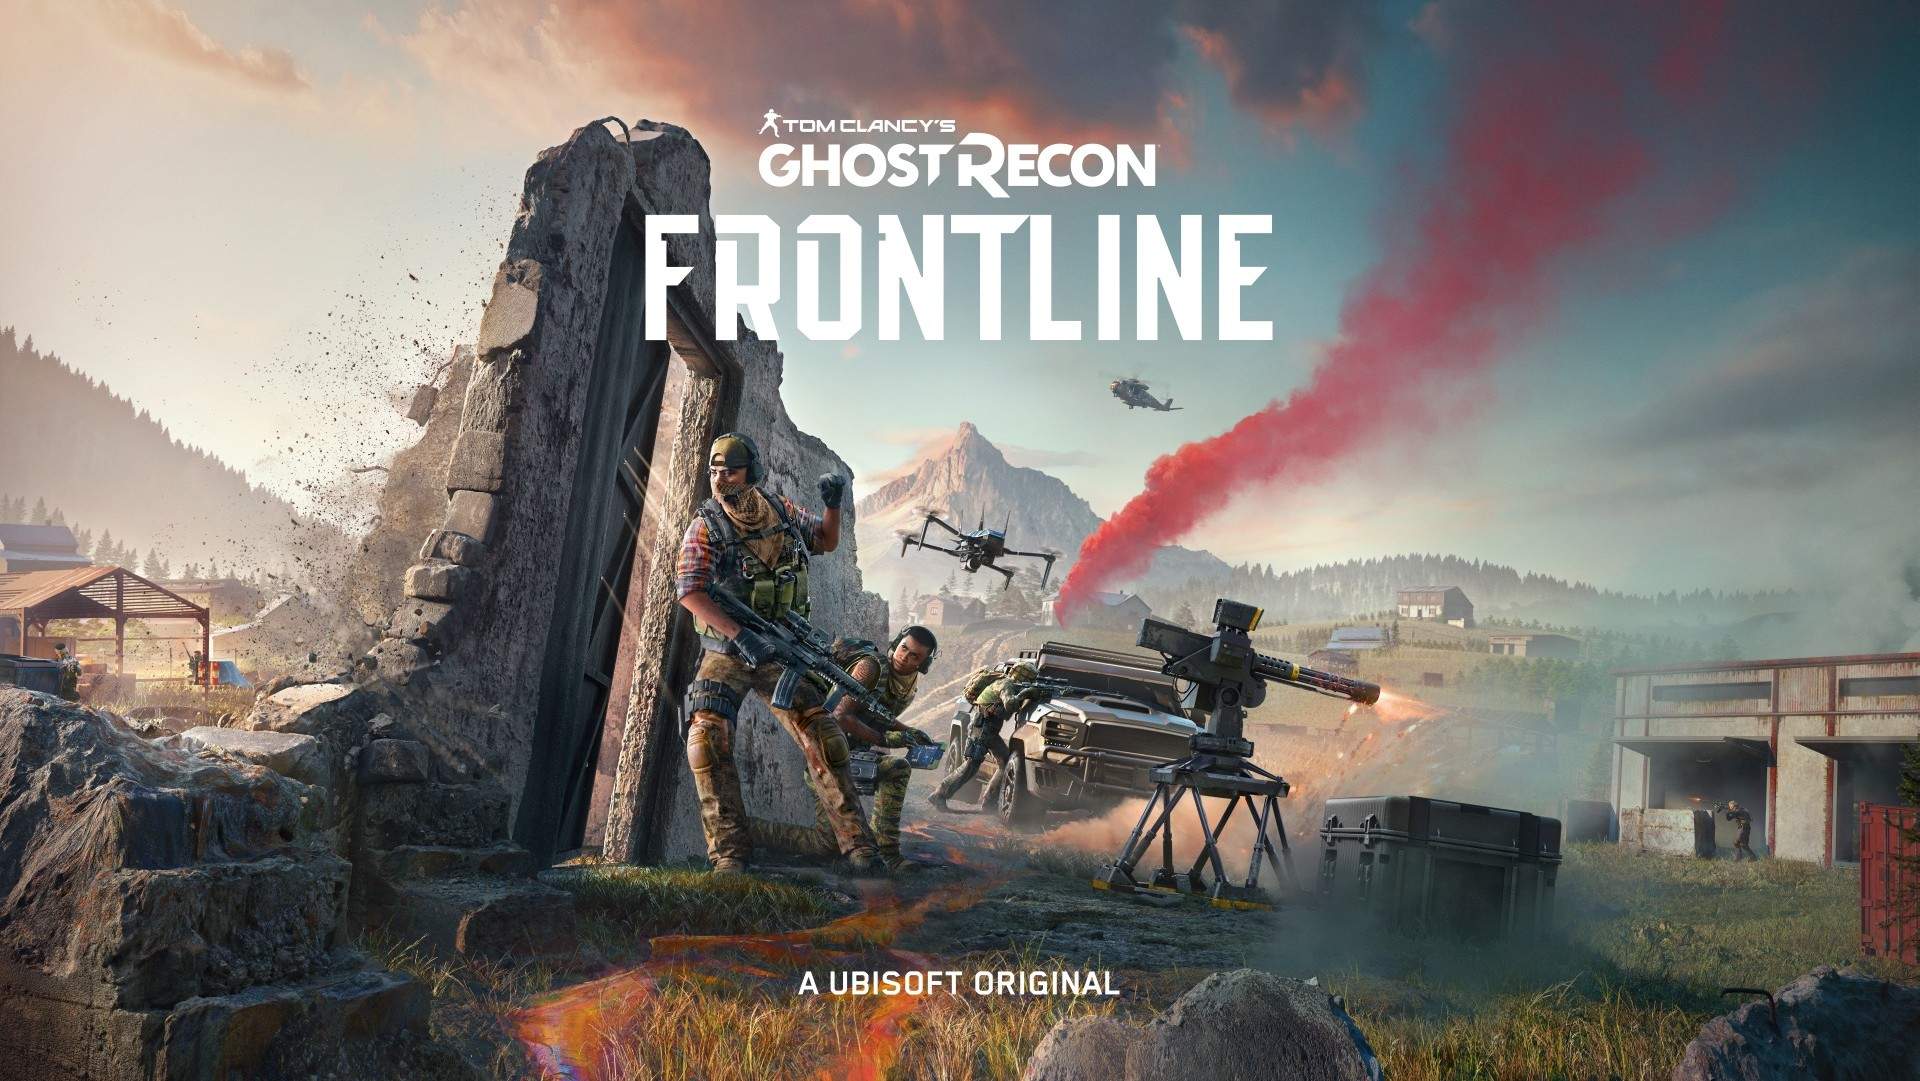 Video For Ghost Recon Frontline Drops 100 Players into Massive Tactical-Action Battles